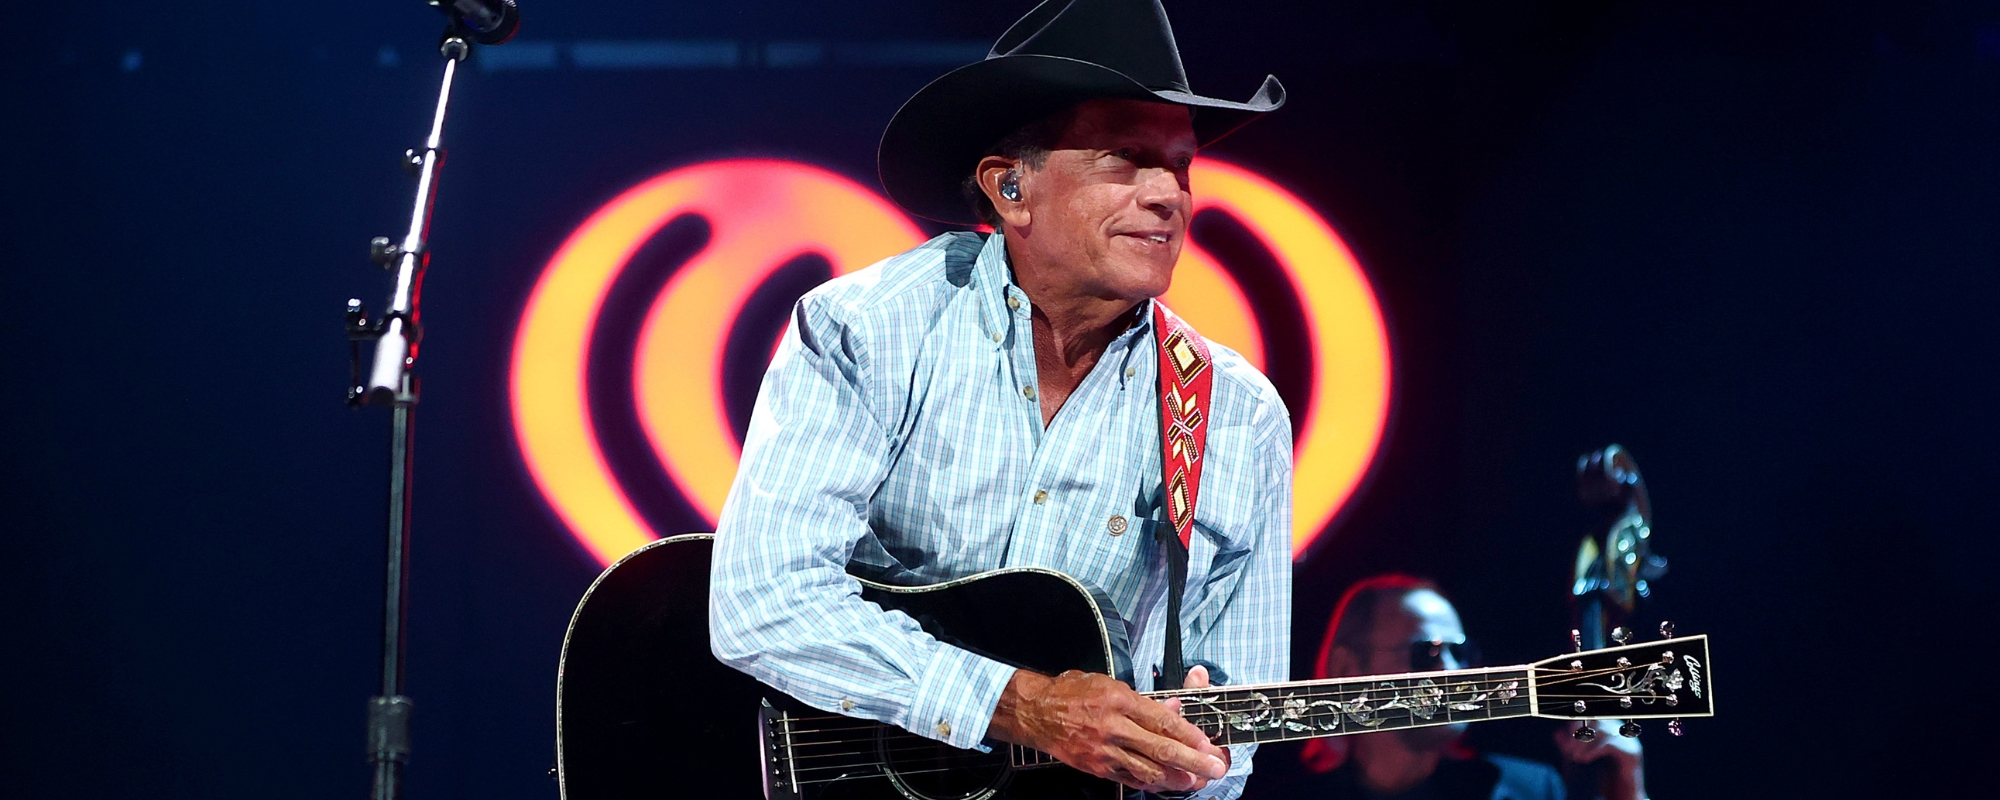 George Strait Releasing New Song “MIA Down In MIA” Tonight, Reveals Tracklist for Upcoming Album